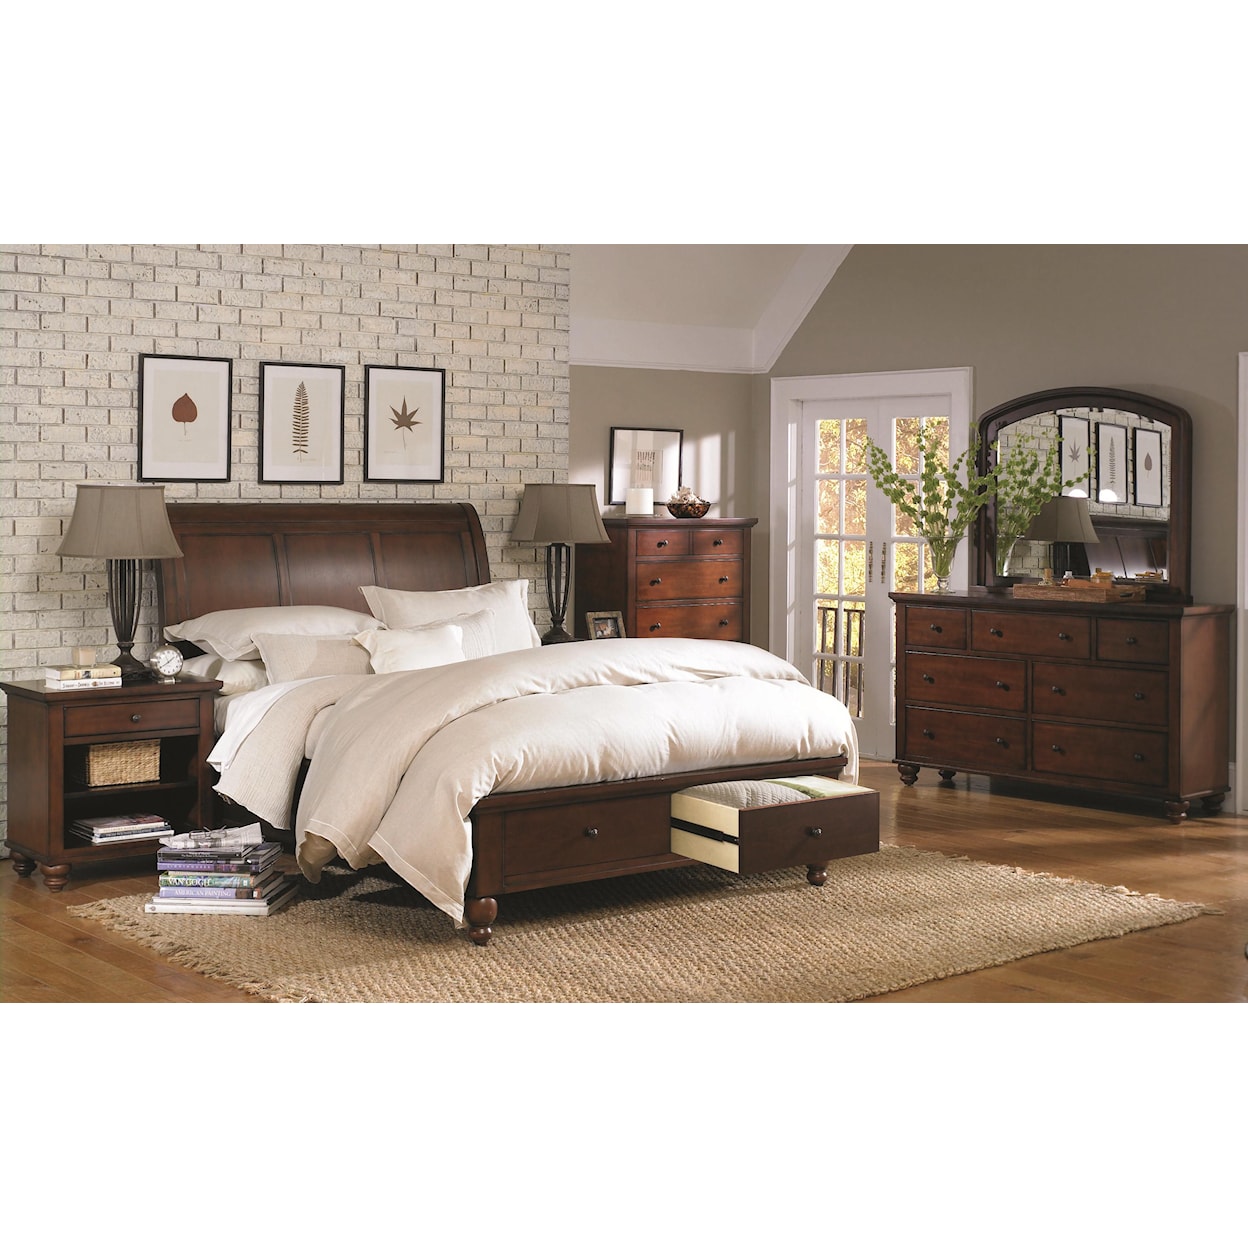 Aspenhome Clinton King Storage Sleigh Bed